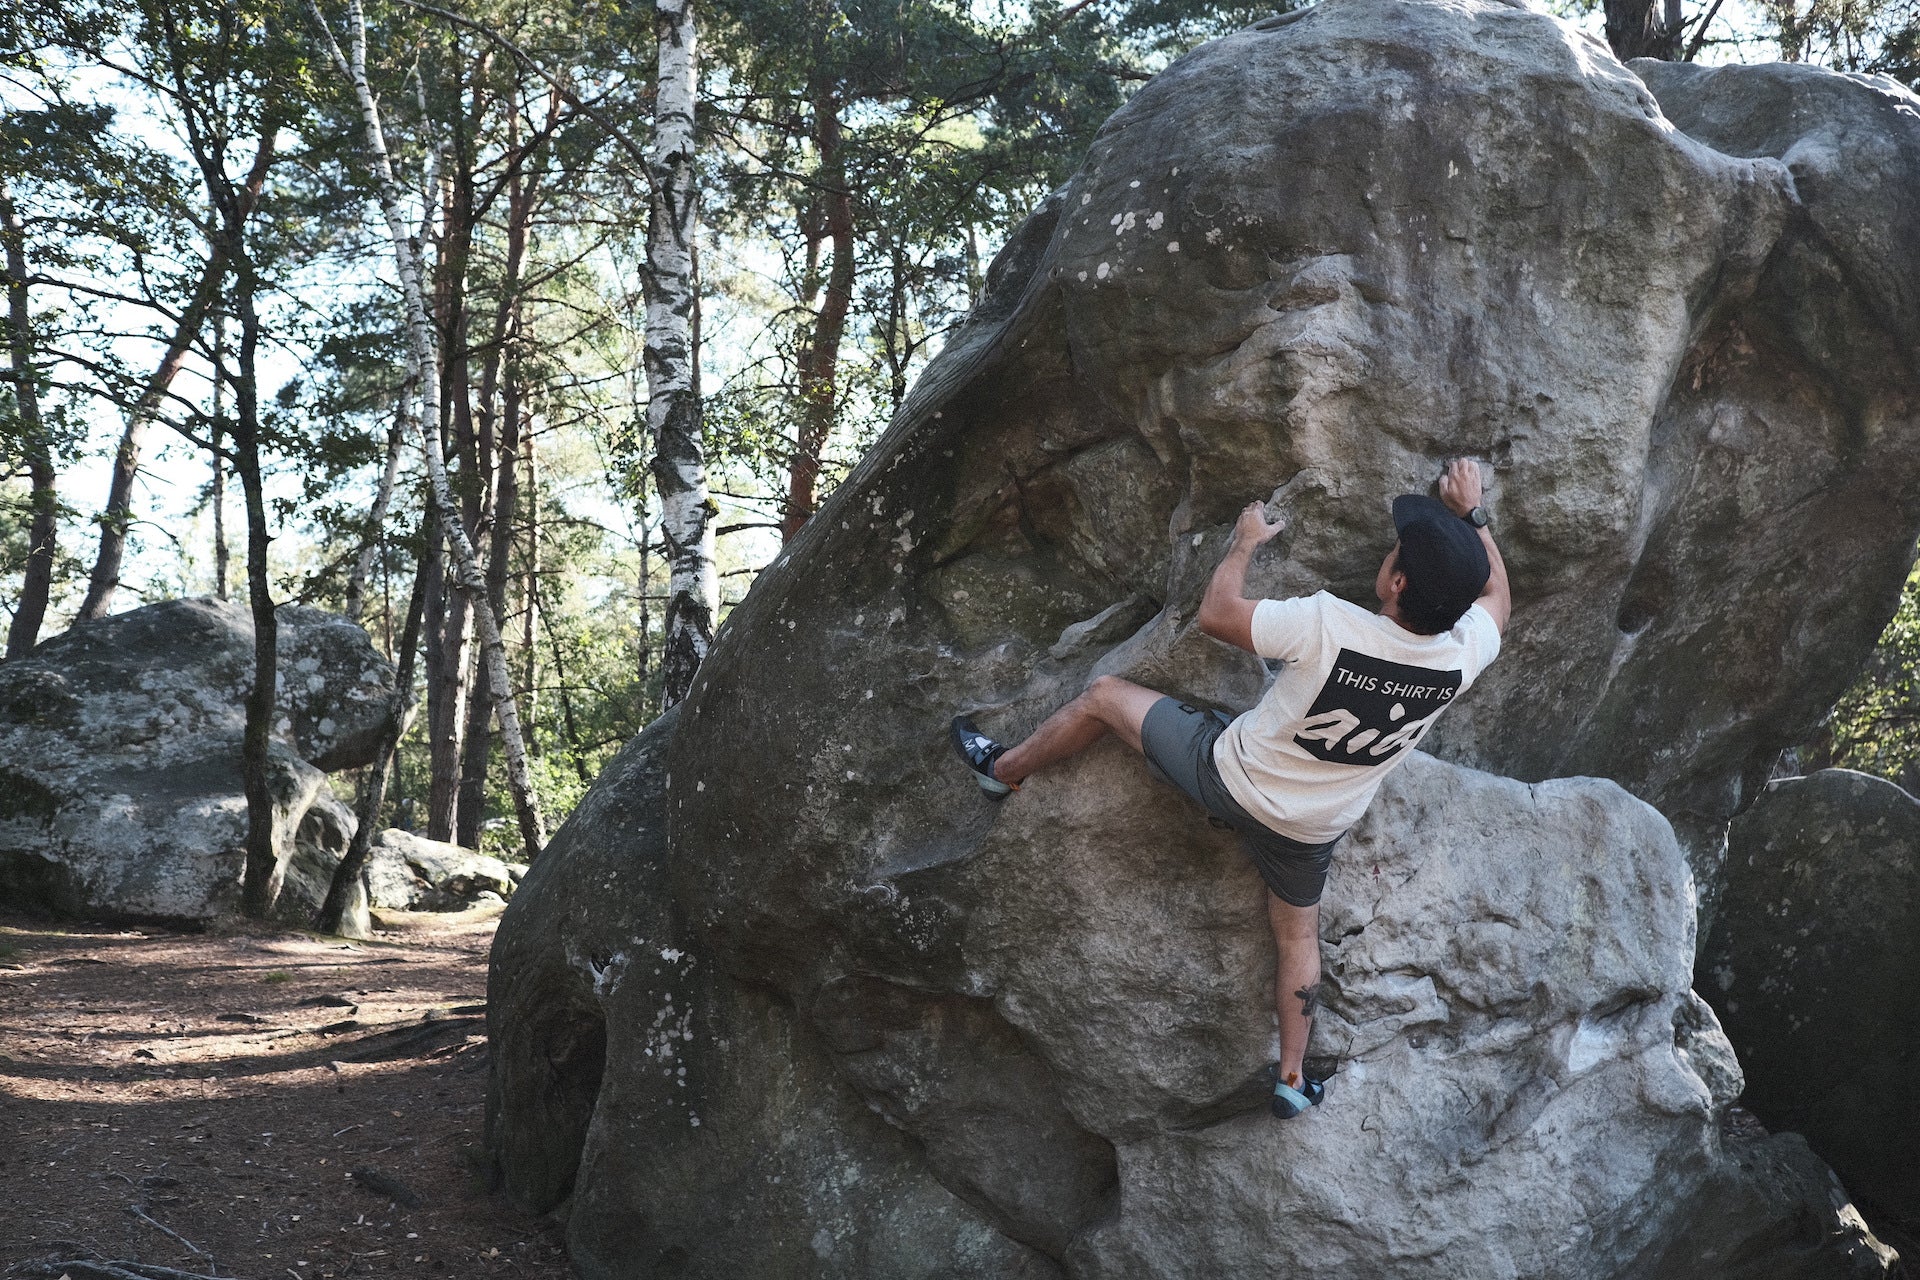 Person climbing a boulder in the woods while wearing a shirt that says "this shirt is aid"